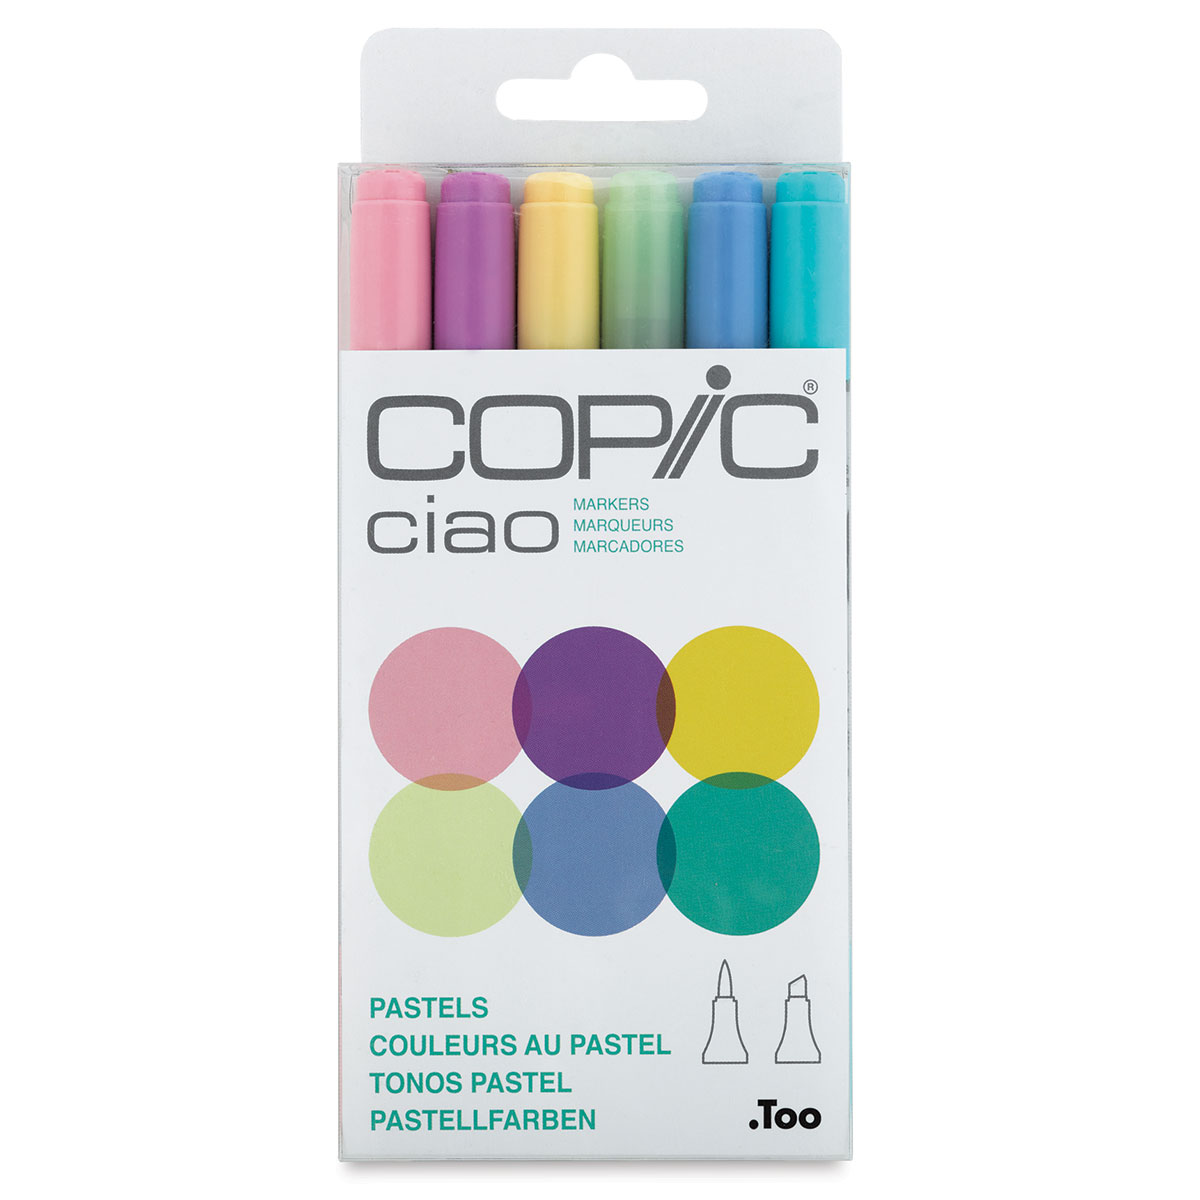 Copic Ciao Markers Double Ended Markers Double/Two Nib Pens Various Inks 